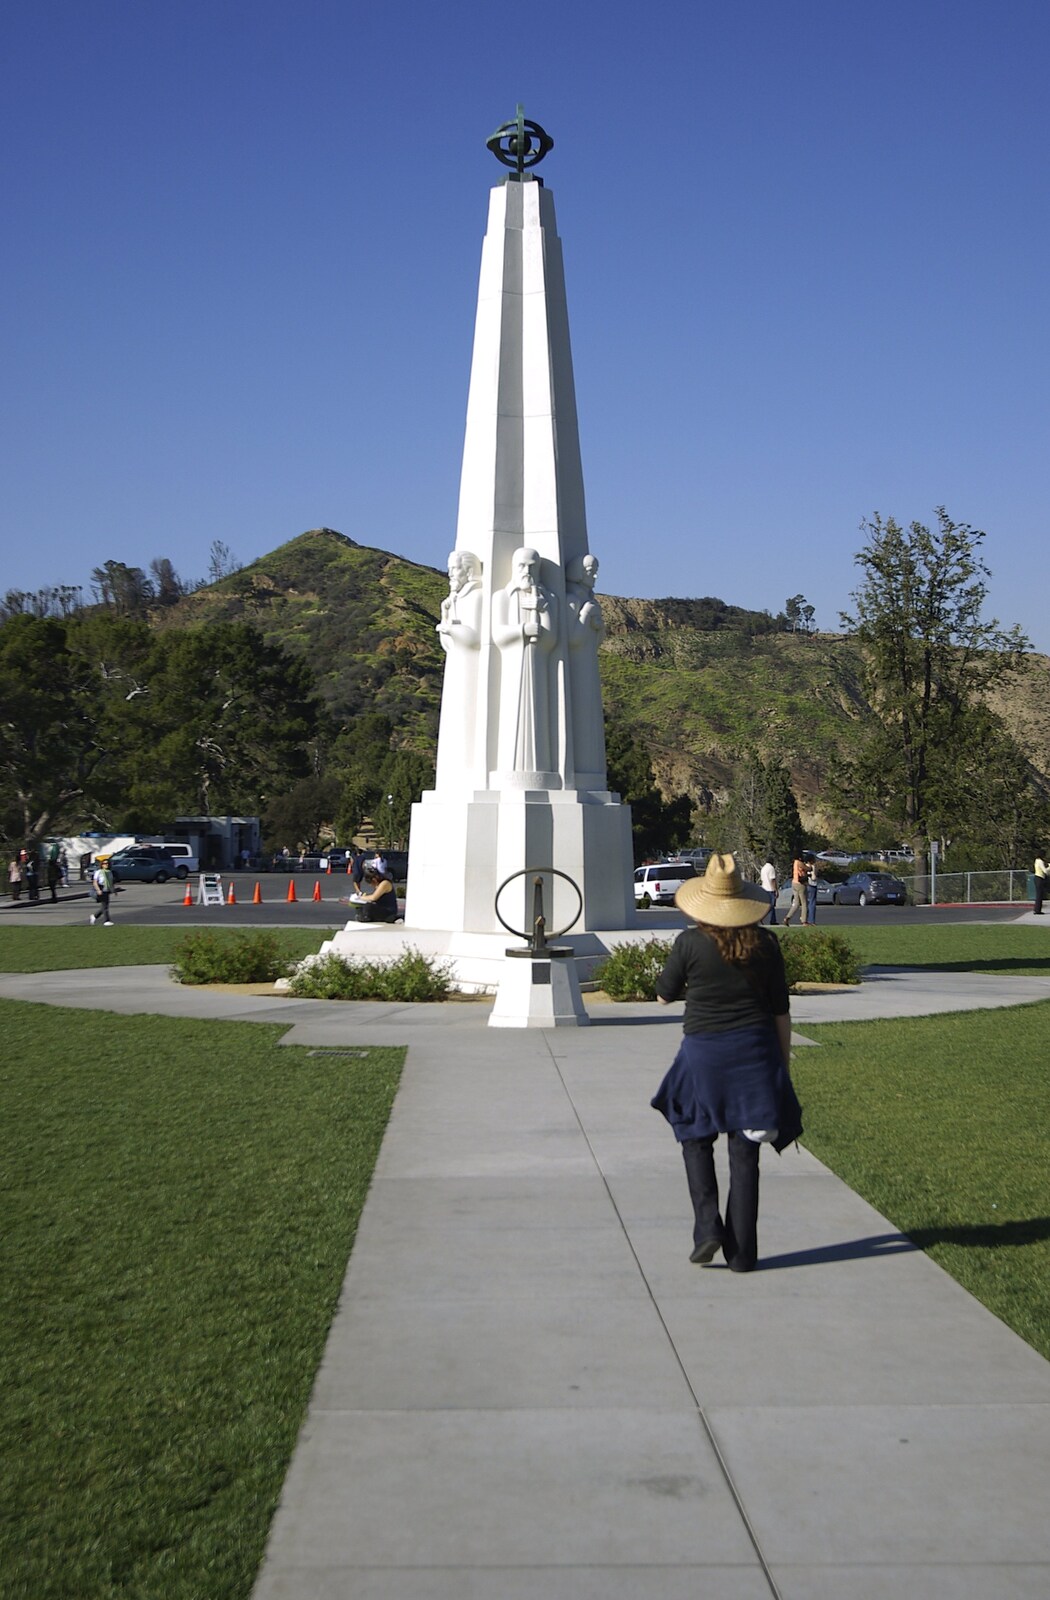 San Diego and Hollywood, California, US - 3rd March 2008: A statue celebrating Galileo, Kepler, et al